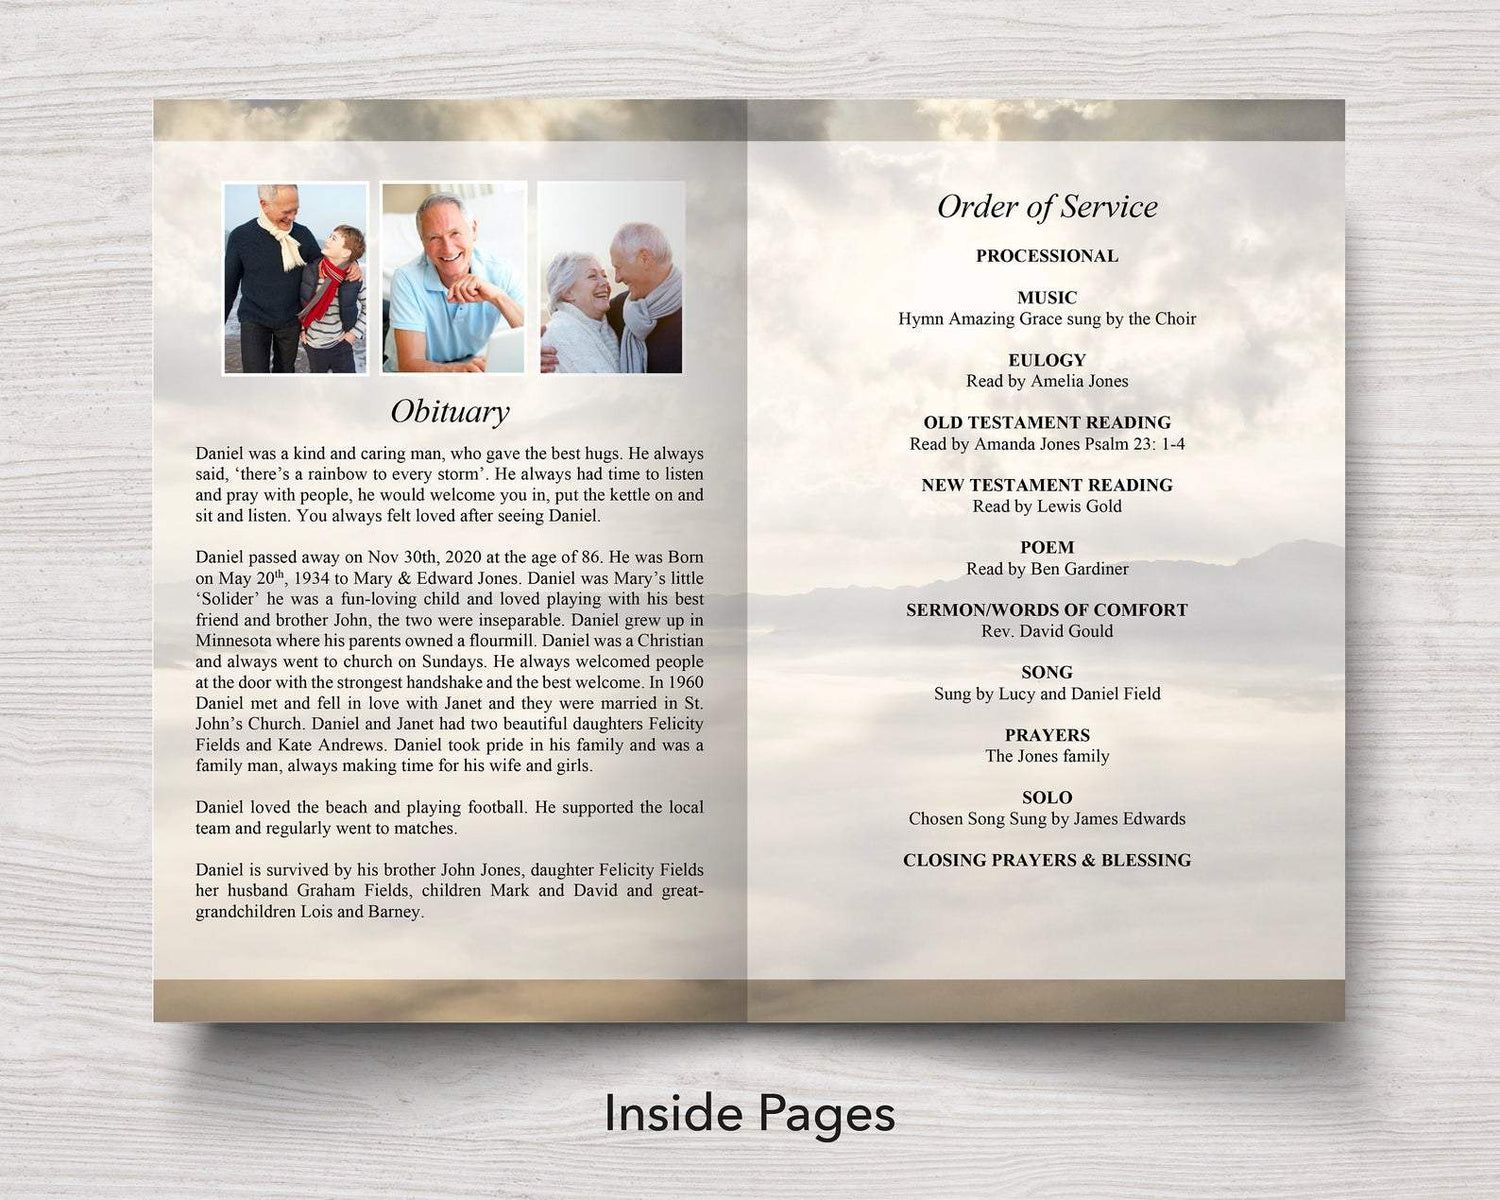 4 Page Mountain Funeral Program Template